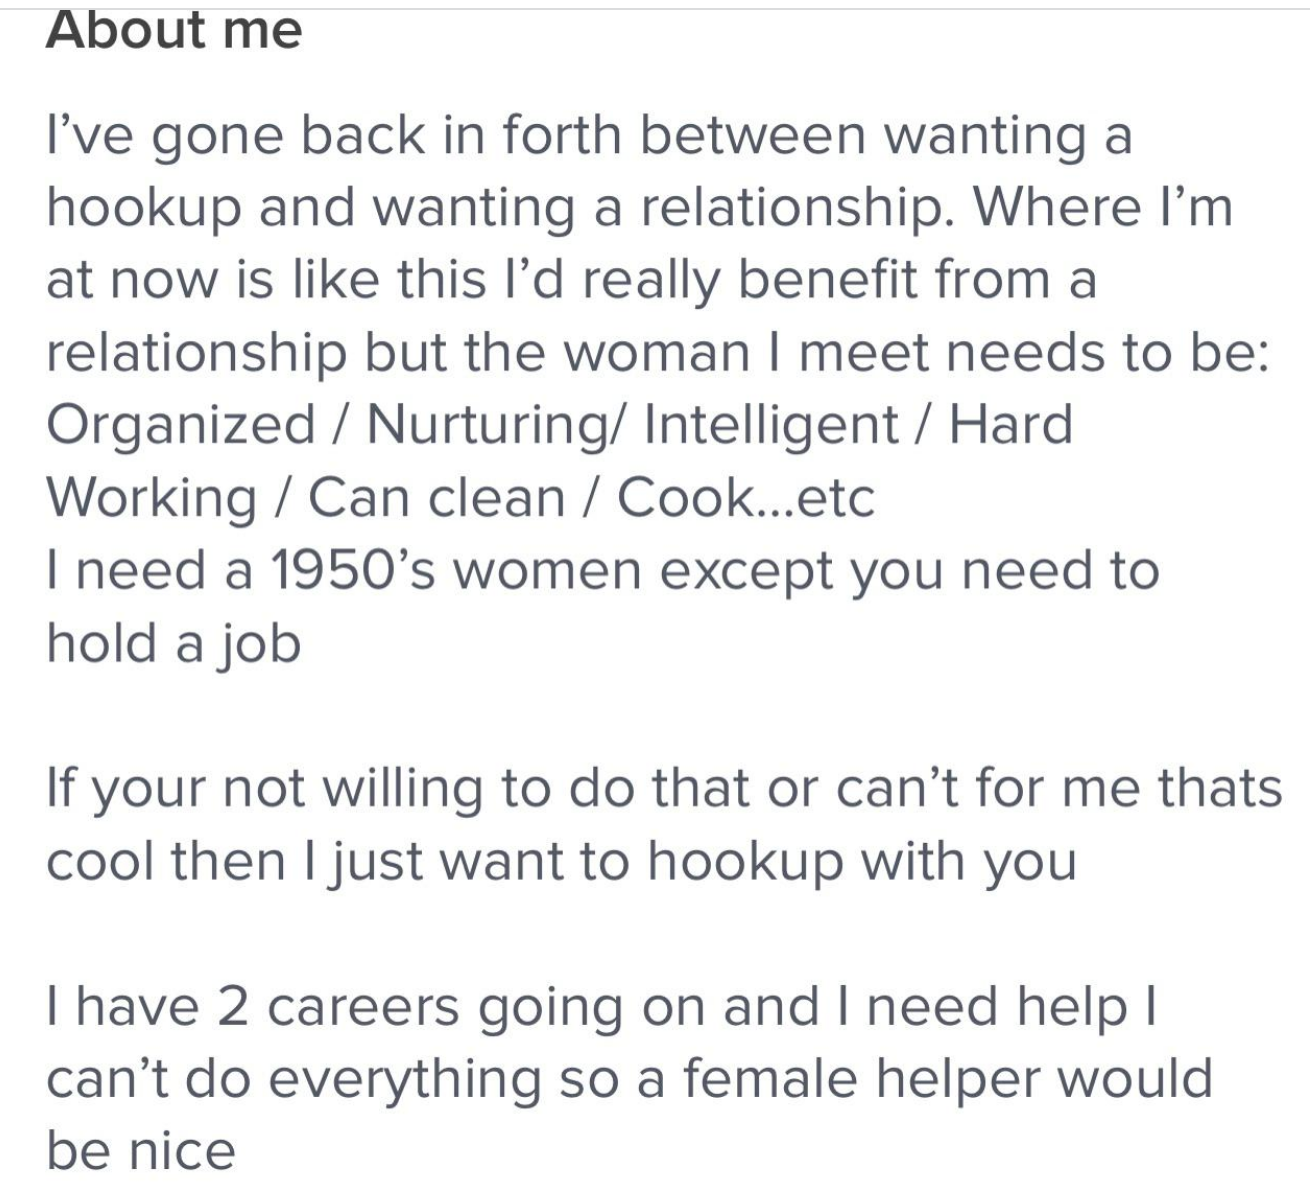 He really wants a &quot;female helper,&quot; a 1950s woman with a job who can also cook, clean, etc, but otherwise he&#x27;ll just hook up with you